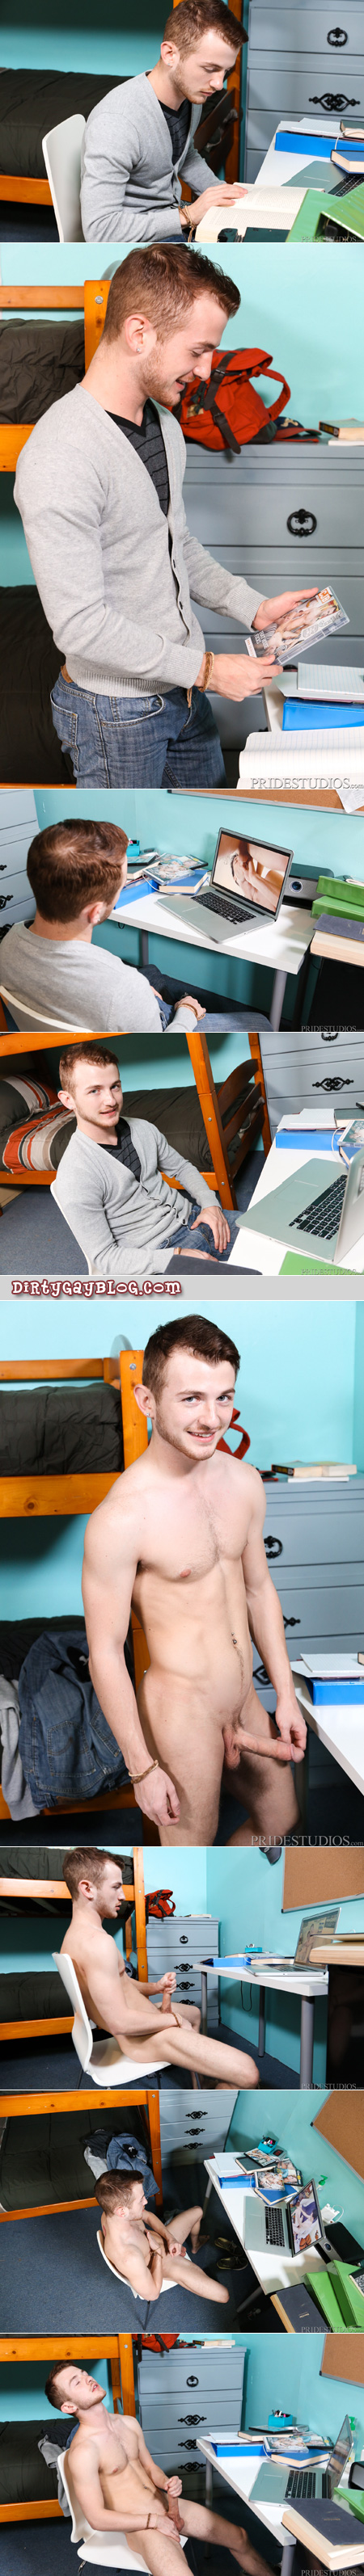 Ginger twink finds his college roommate's gay porn stash and jacks off to it.